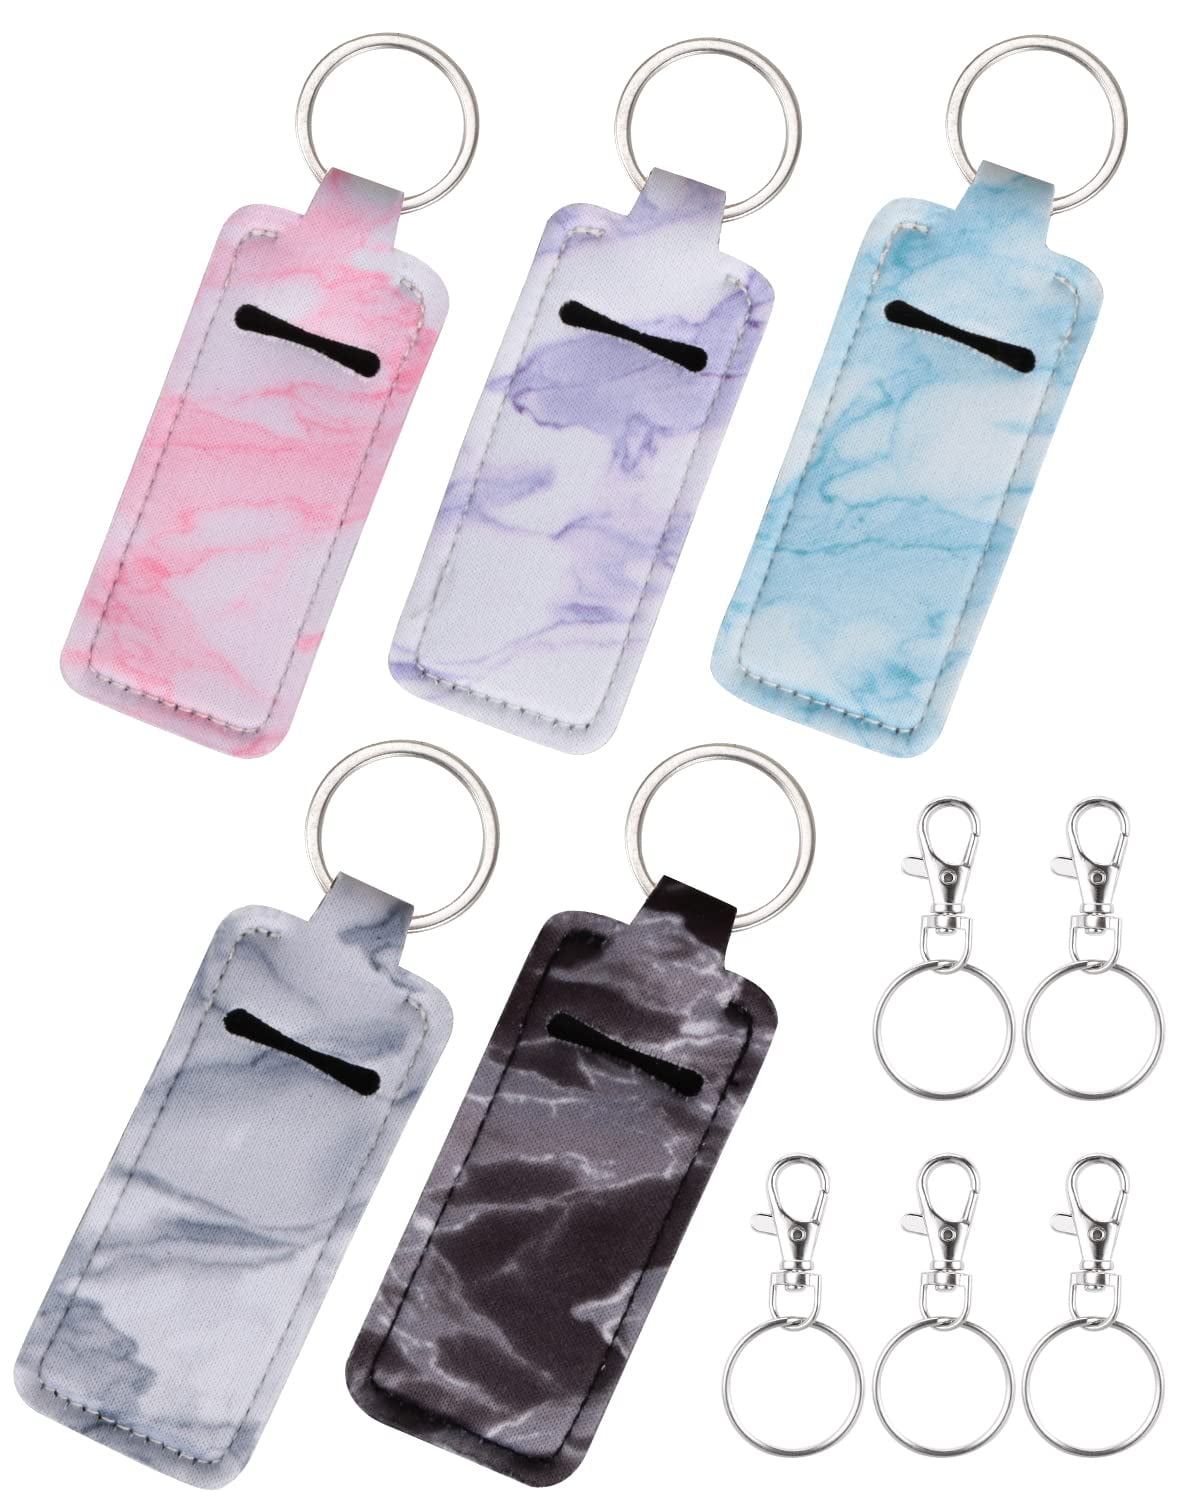 4 Vibrant Colors Flowers Pattern KISSBUTY 4 Pcs Chapstick Holder Keychains Lipstick Holder Keychains Chapstick Keyring Holder with Metal Clip Cords Suitable for Chapstick Tracker Safeguard Lanyard 